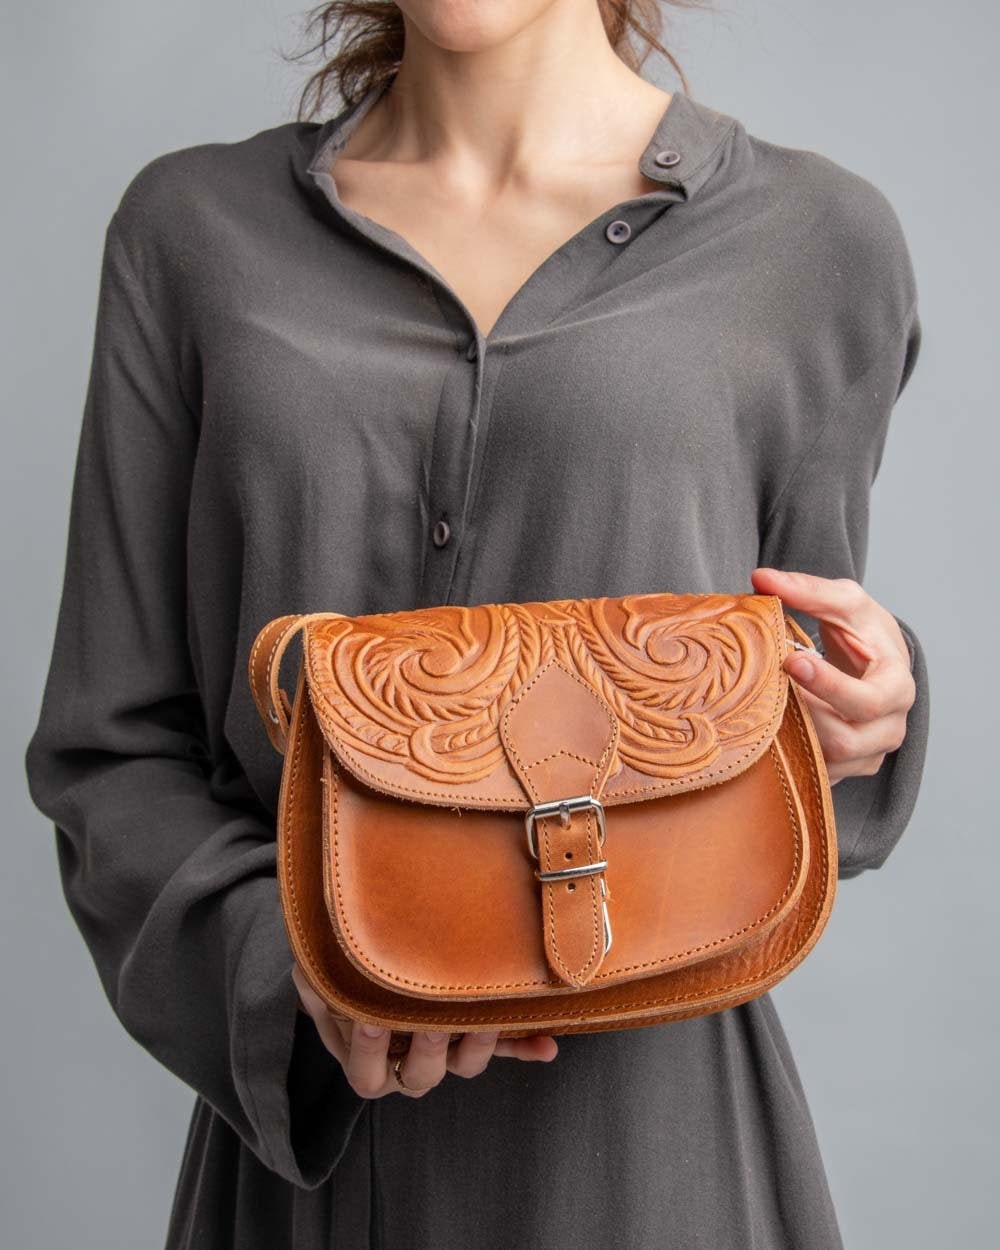 Tooled leather crossbody purse for women, Womens leather saddle bag, Women's leather accessories